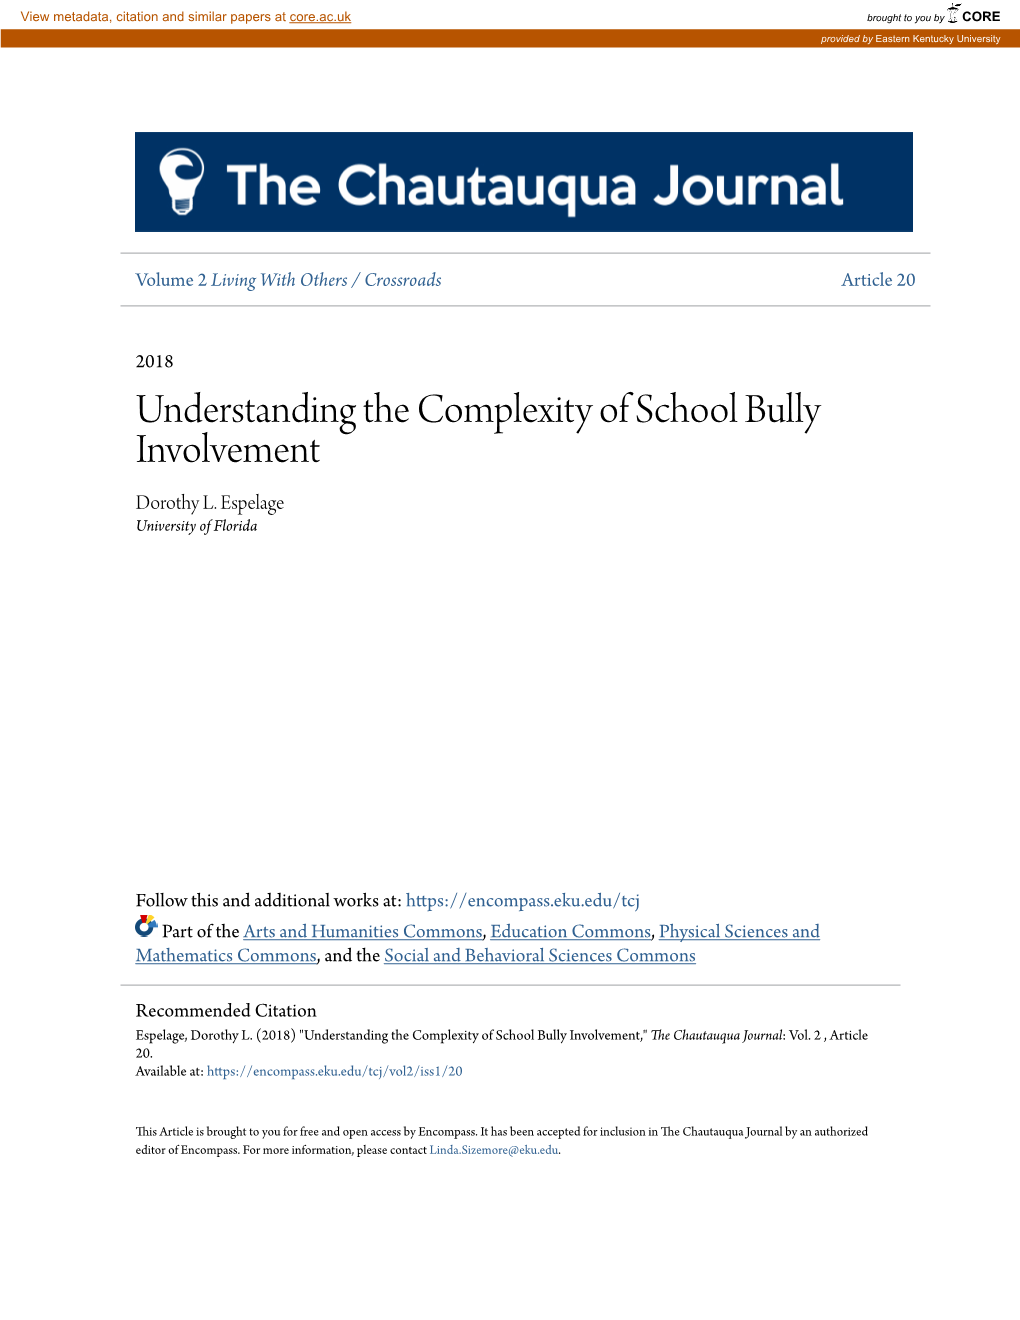 Understanding the Complexity of School Bully Involvement Dorothy L